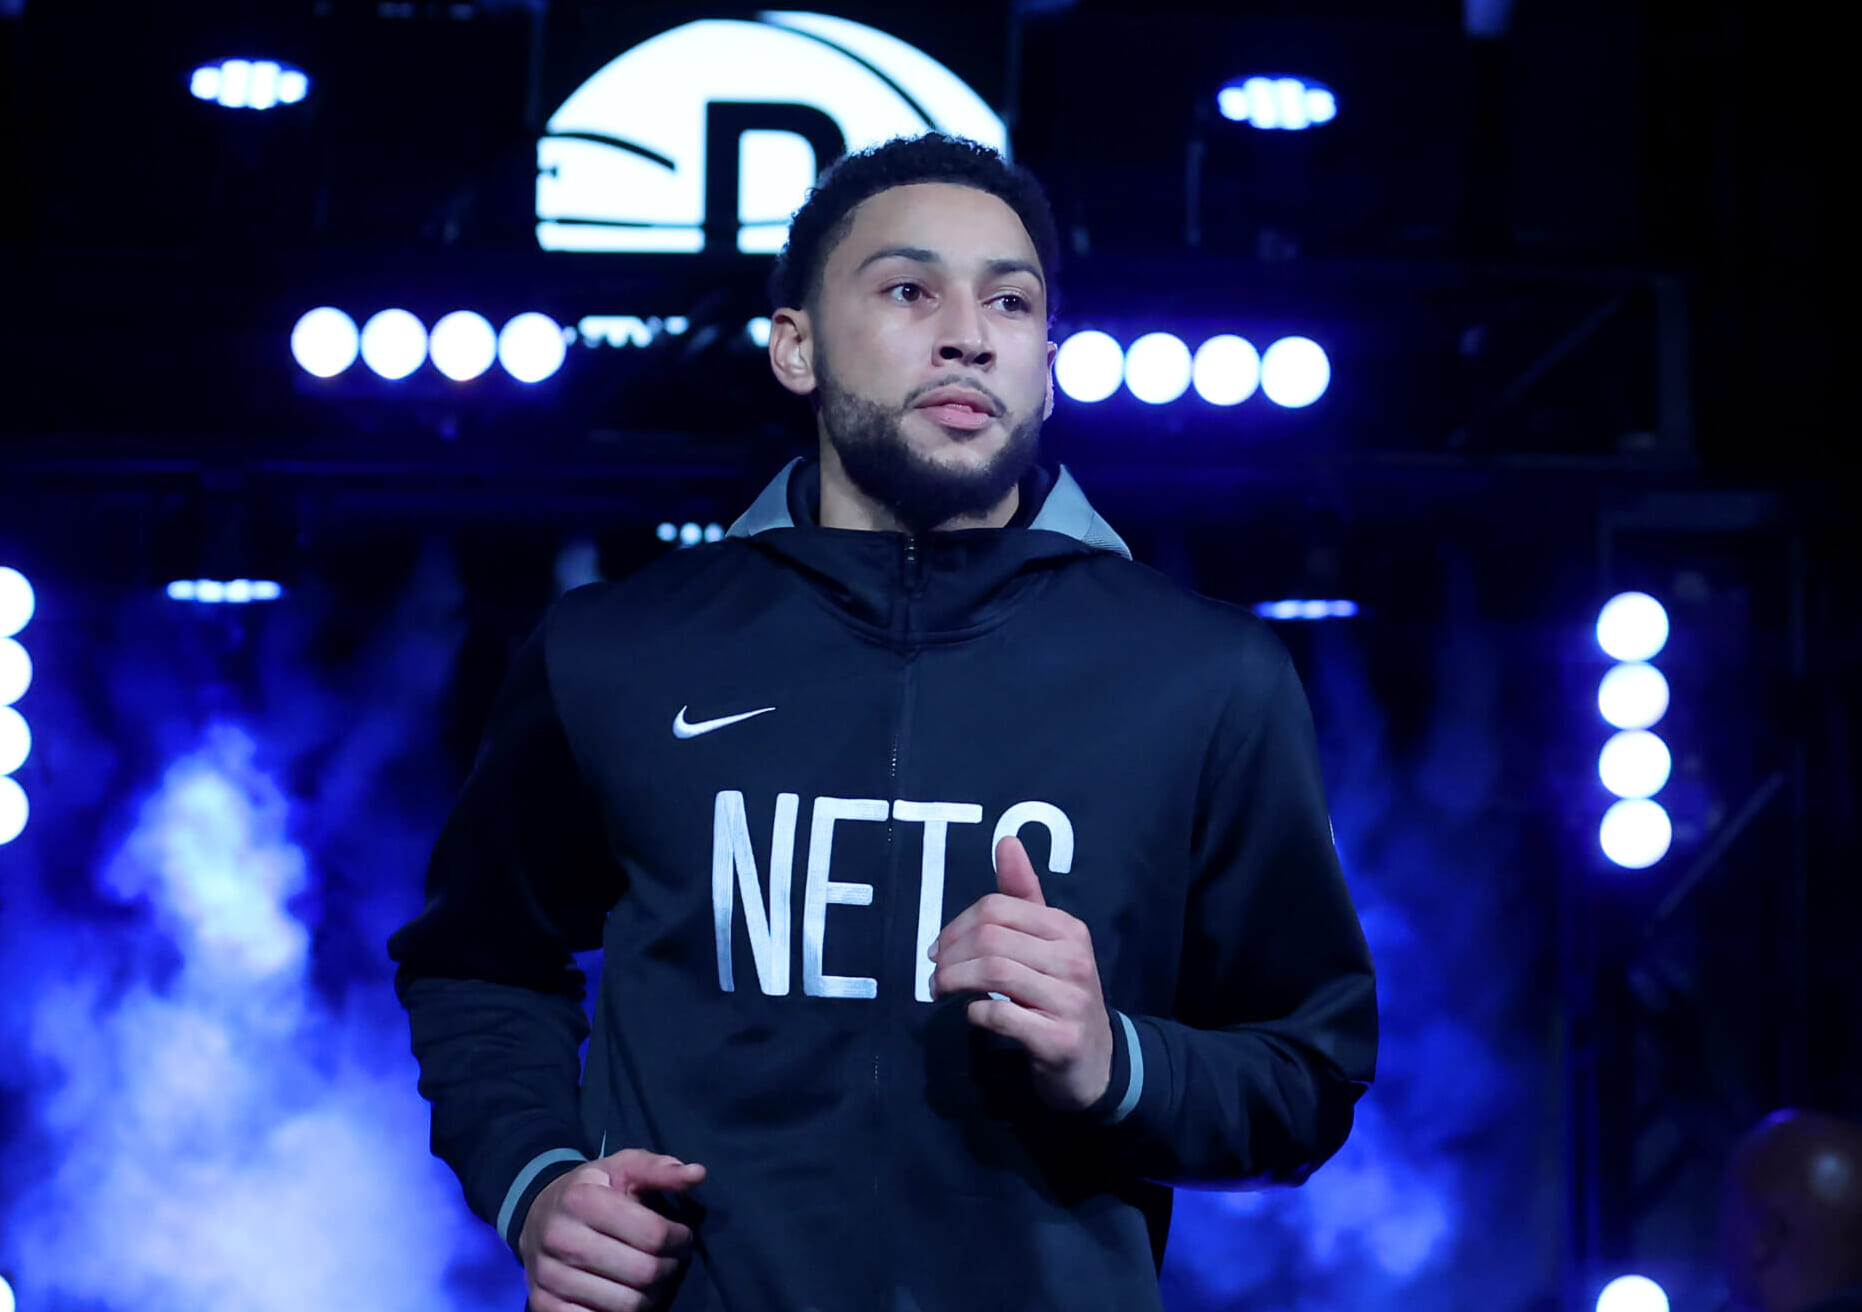 Potential Ben Simmons trade return ‘very little’ after terrible start for Brooklyn Nets